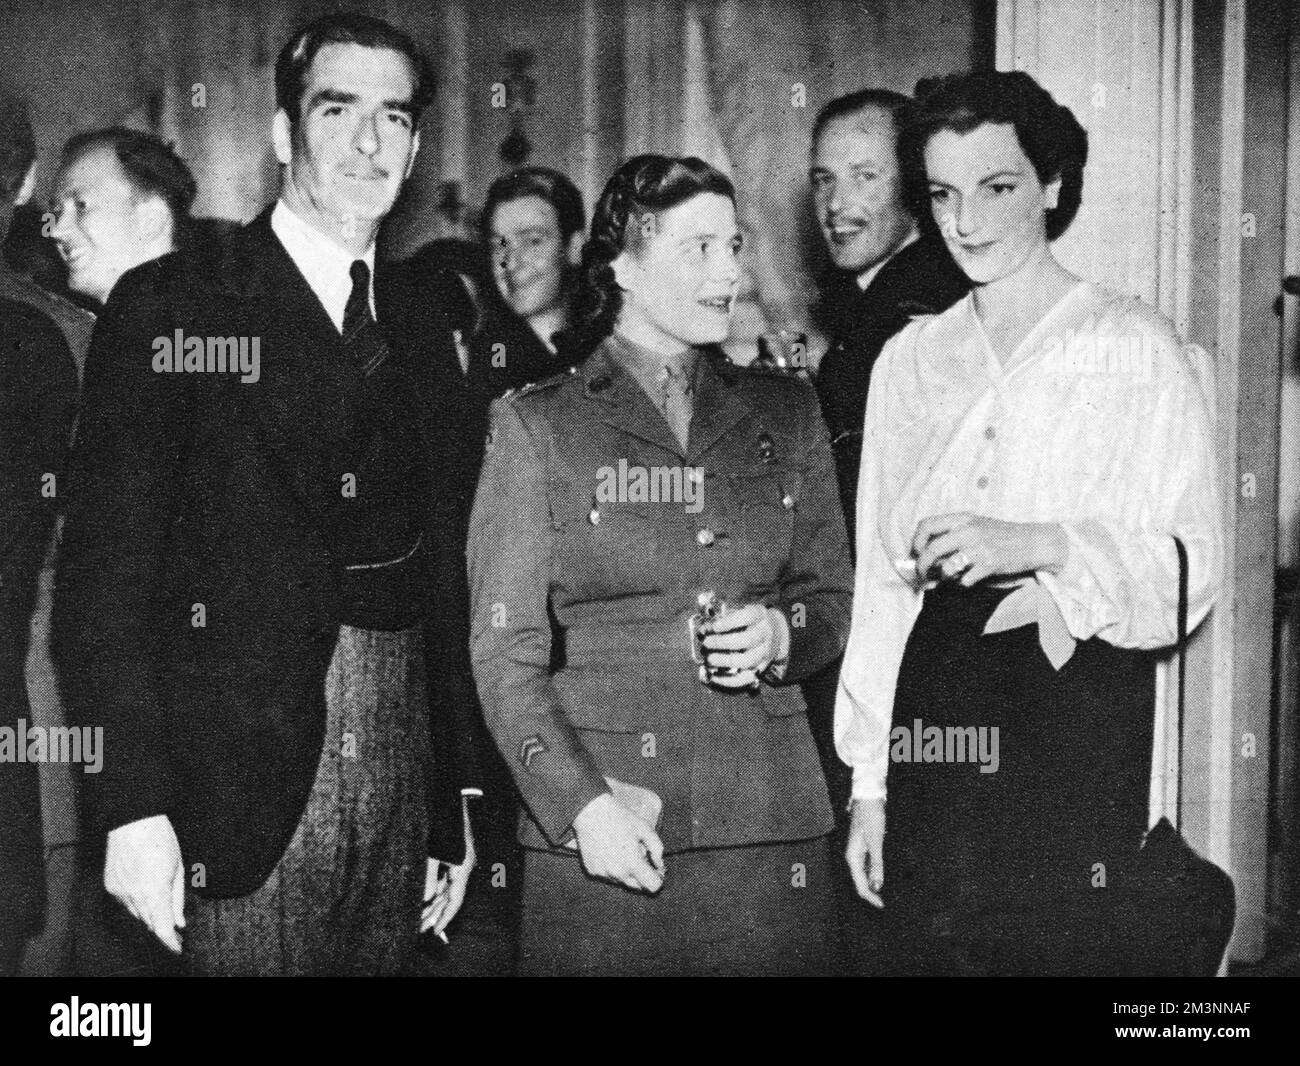 Anthony Eden looks in on the anniversary party of the All-Services Club, of which his wife is the president. Subaltern Mary Churchill, youngest daughter of Winston Churchill, is pictured here at the party, which she attended in her A.T.S uniform.     Date: 1944 Stock Photo